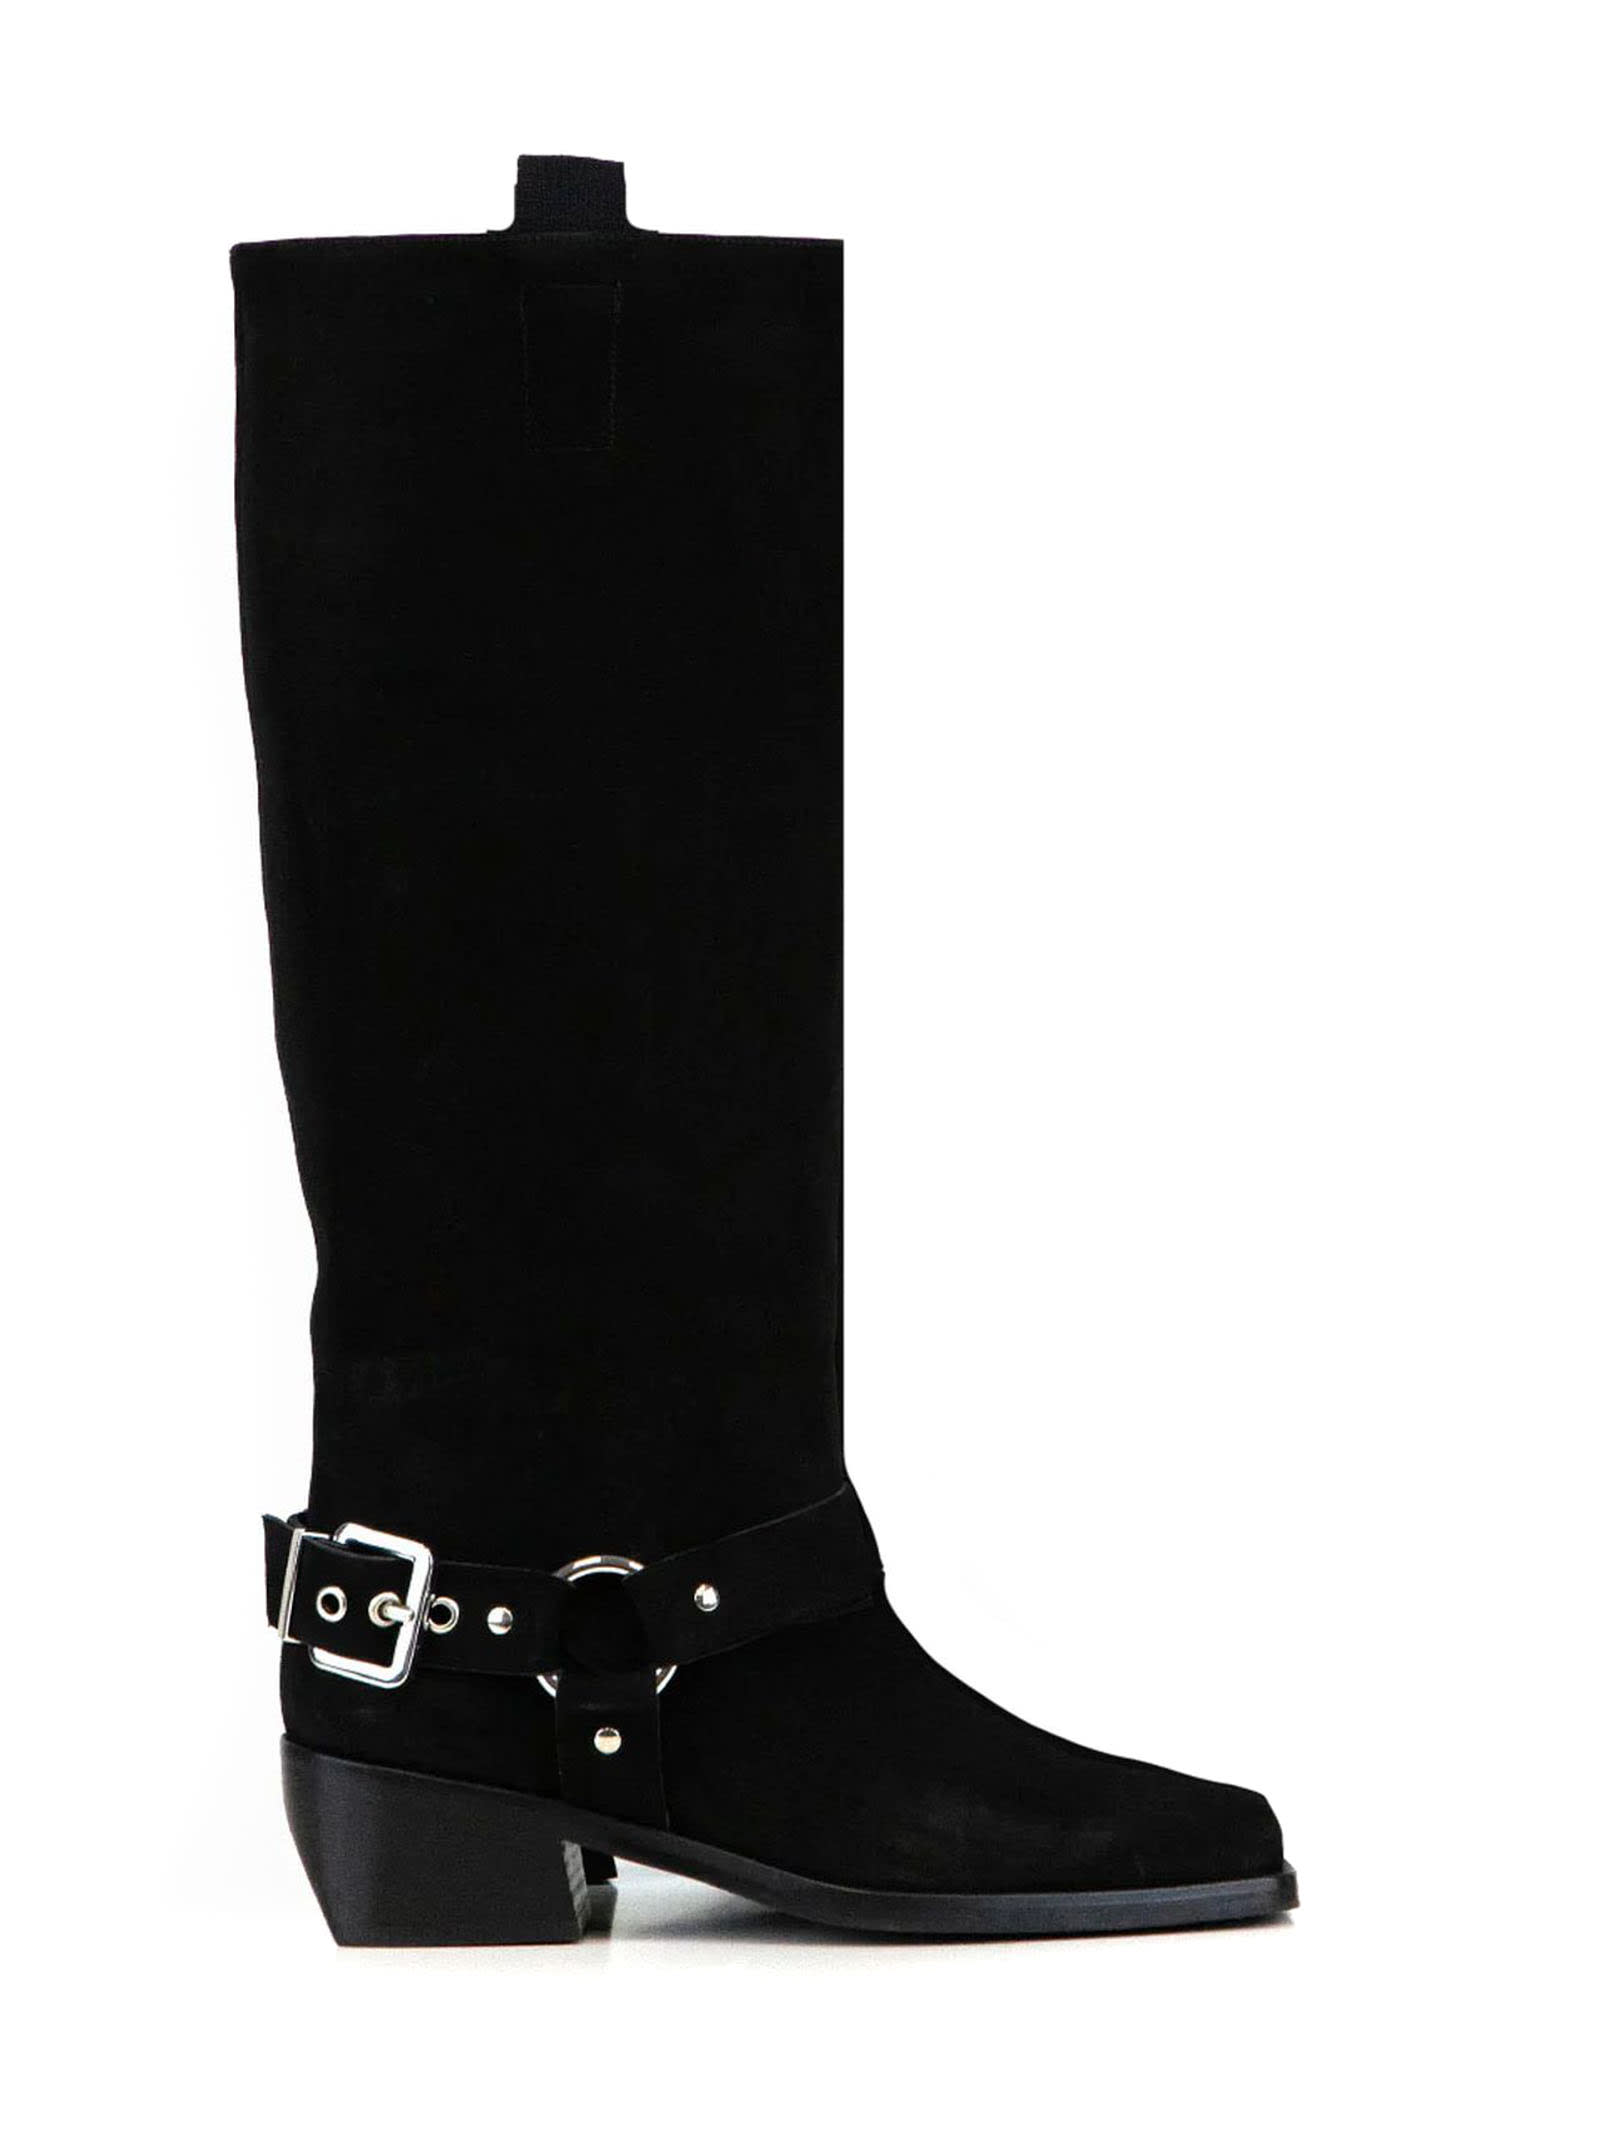 Black Suede Texan Boots